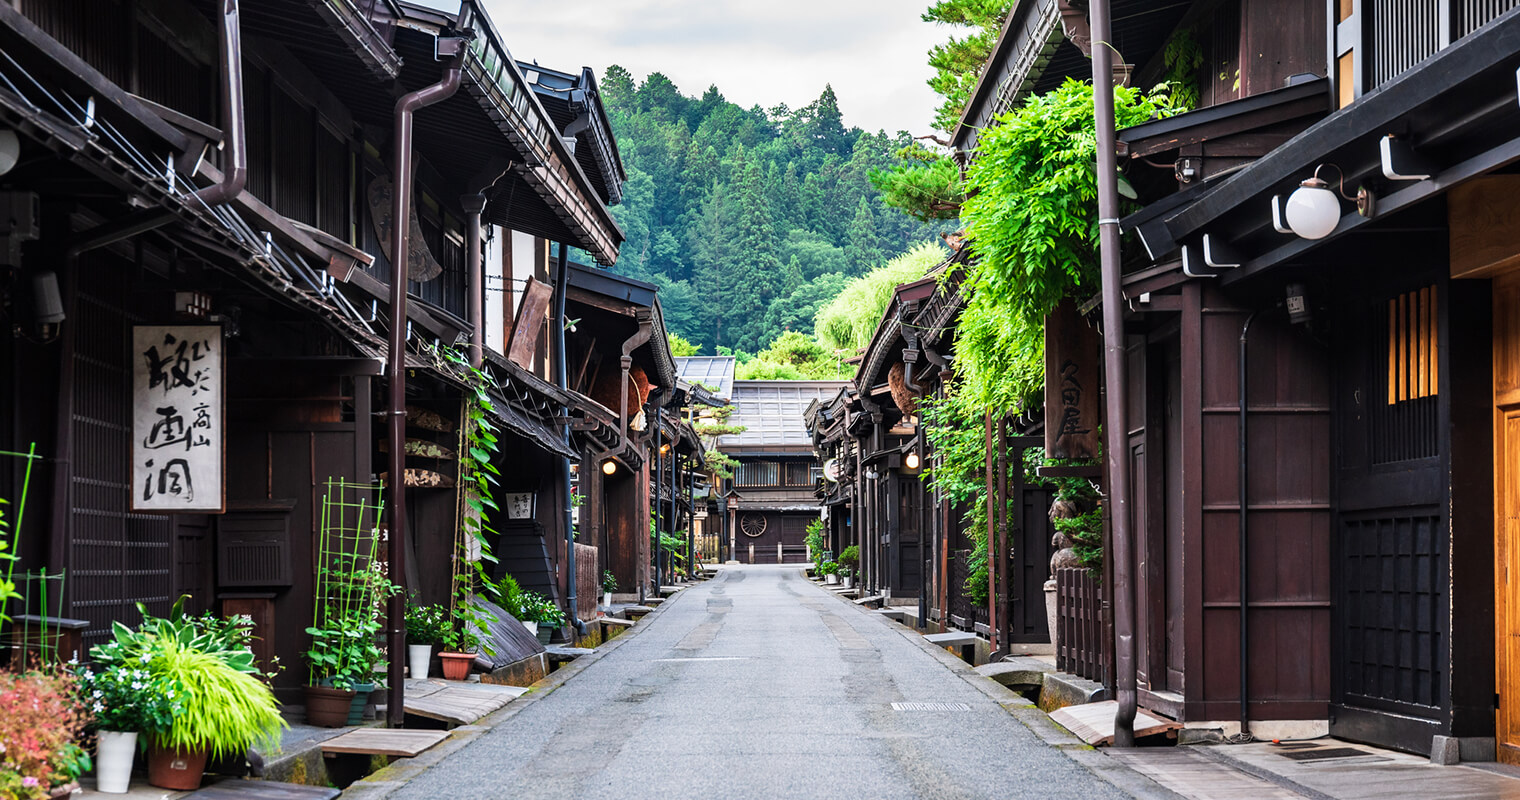 Get a taste of life and culture in Hida Takayama.